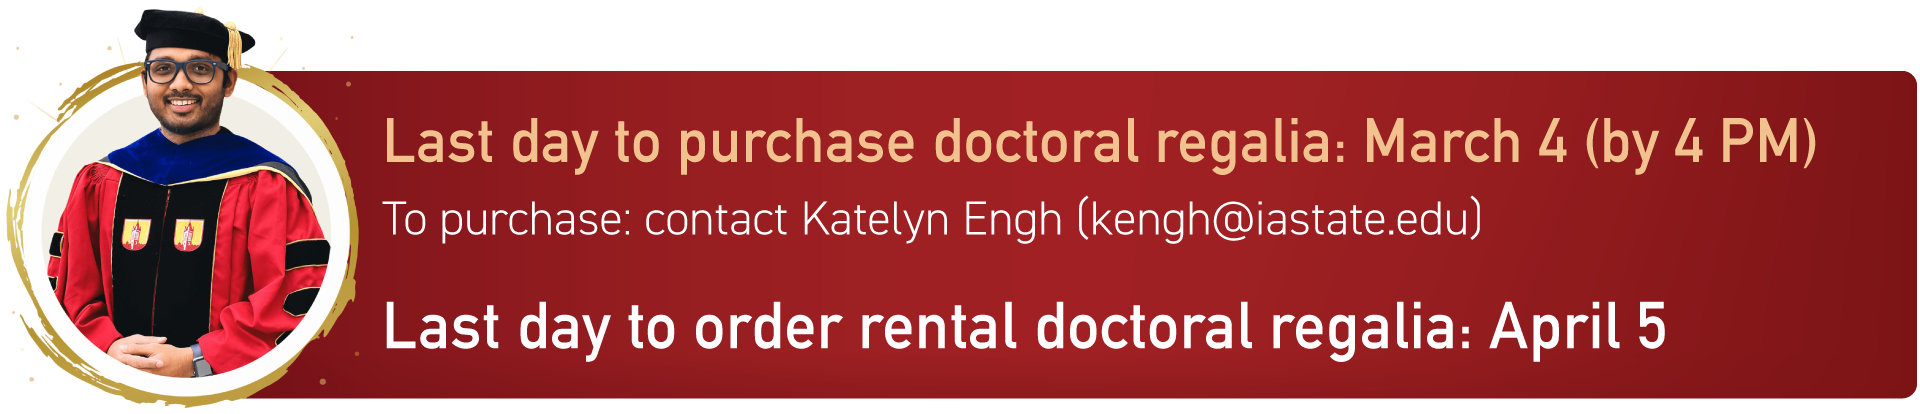 Last day to purchase doctoral regalia: March 3rd. Last day to rent doctoral regalia: April 19th